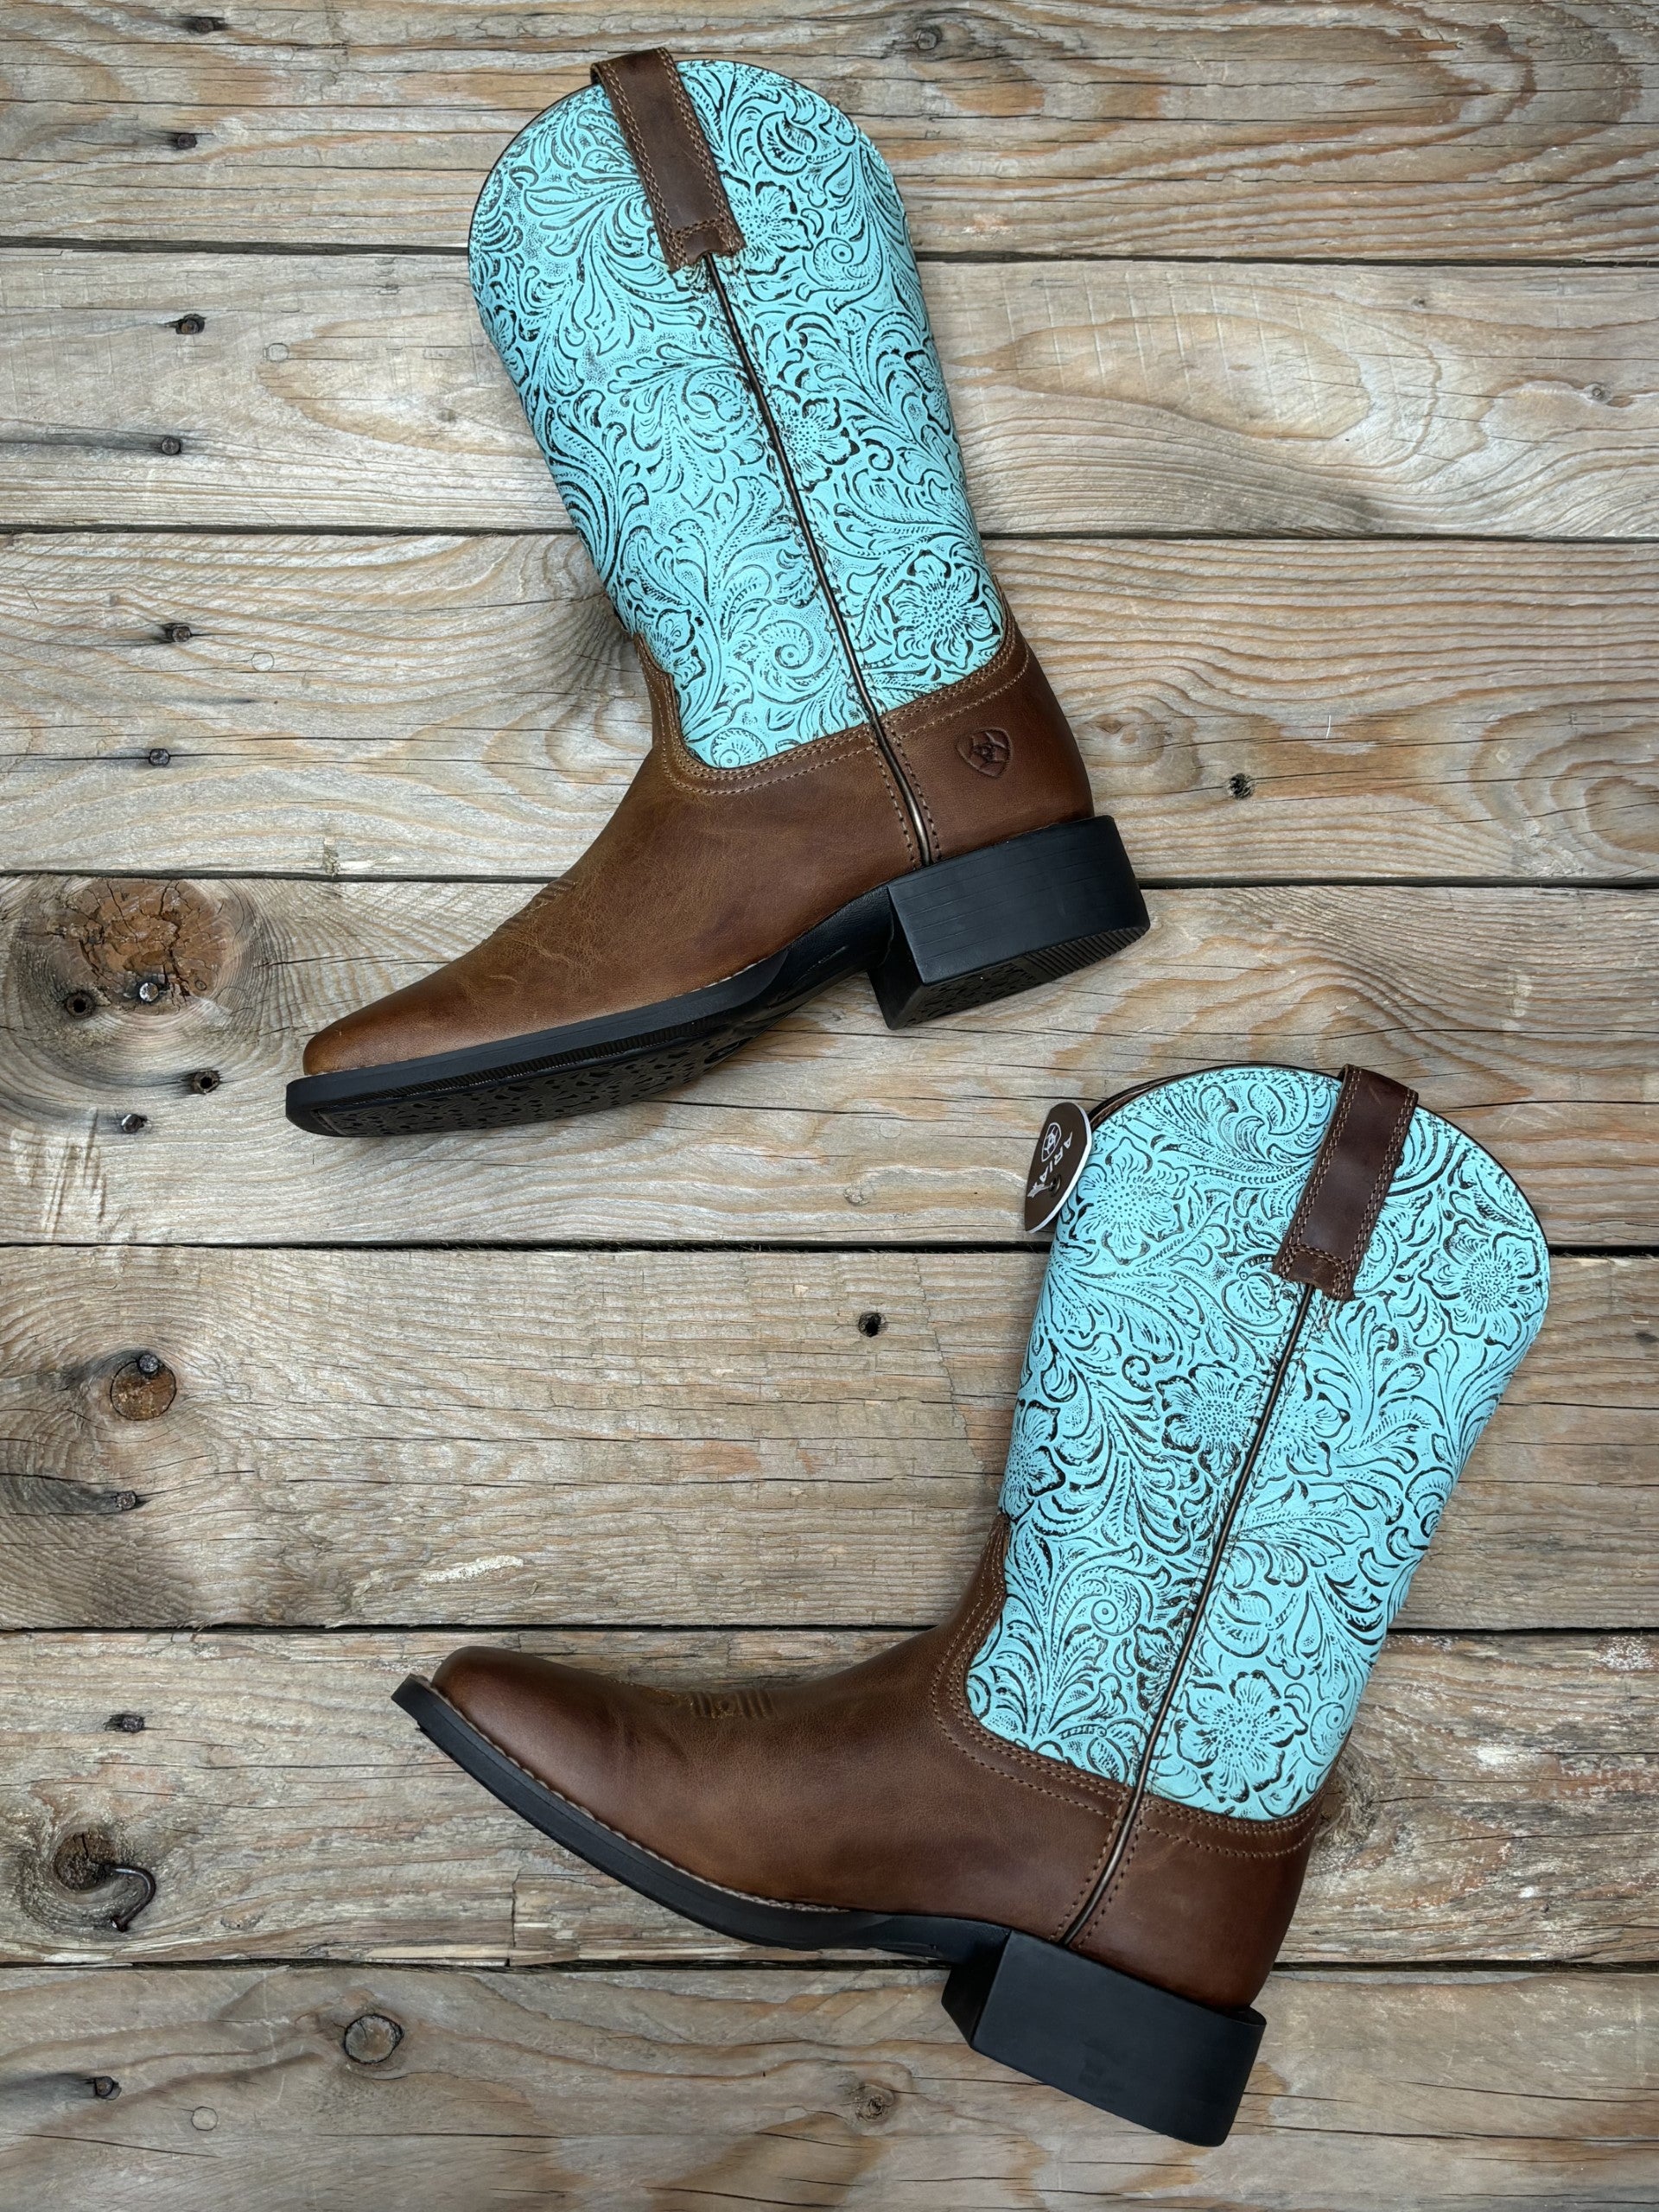 Womens Ariat Round Up Boot - Turquoise Floral Emboss (6795183849549)